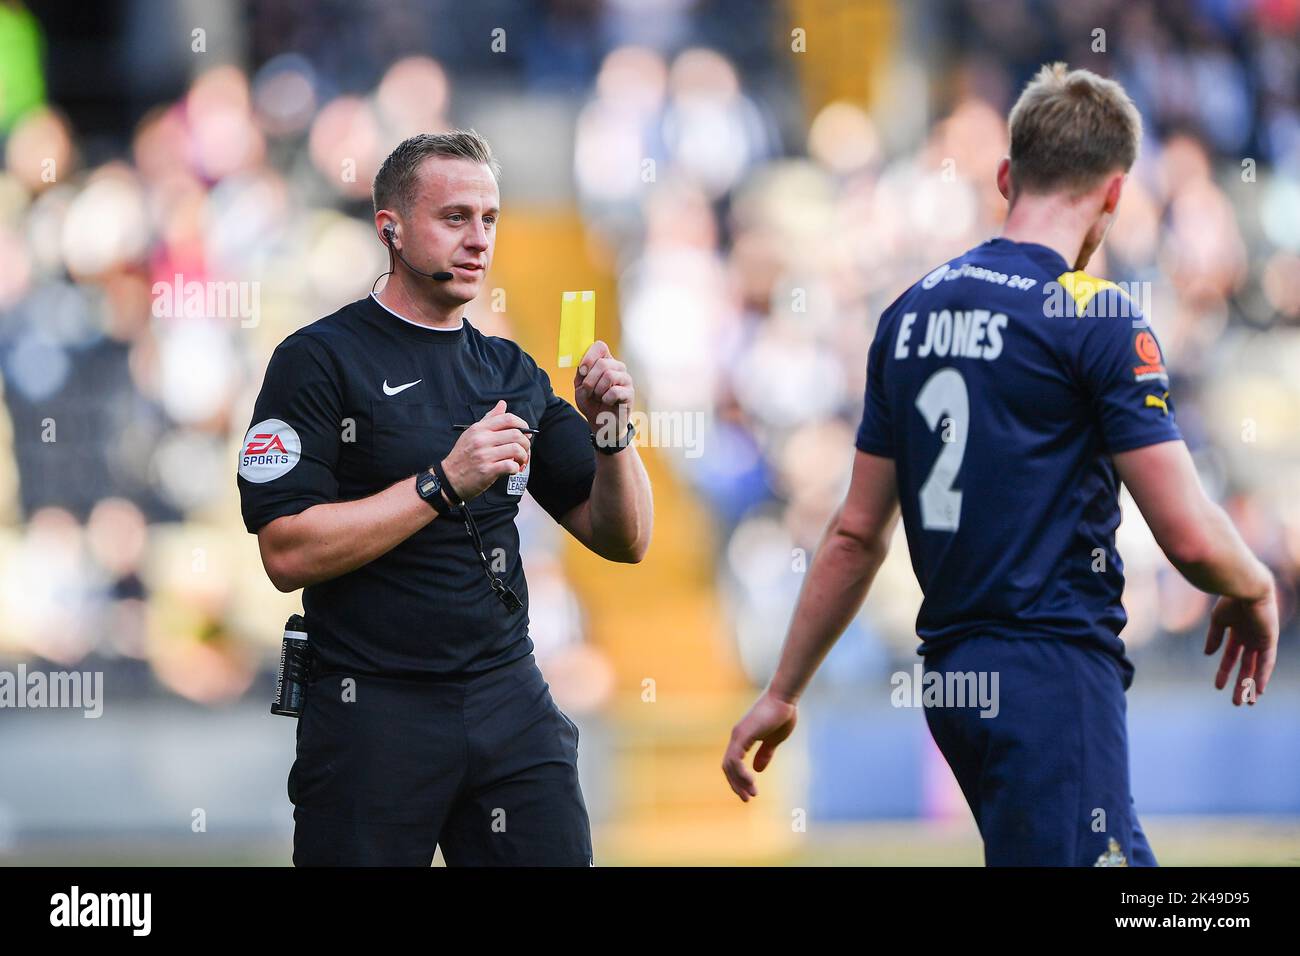 Nottingham, UK. 1st October 2022Referee, Scott Jackson shows a yellow card for unsporting behaviour to Eddy Jones of Altrincham during the Vanarama National League match between Notts County and Altrincham at Meadow Lane, Nottingham on Saturday 1st October 2022. (Credit: Jon Hobley | MI News) Credit: MI News & Sport /Alamy Live News Stock Photo